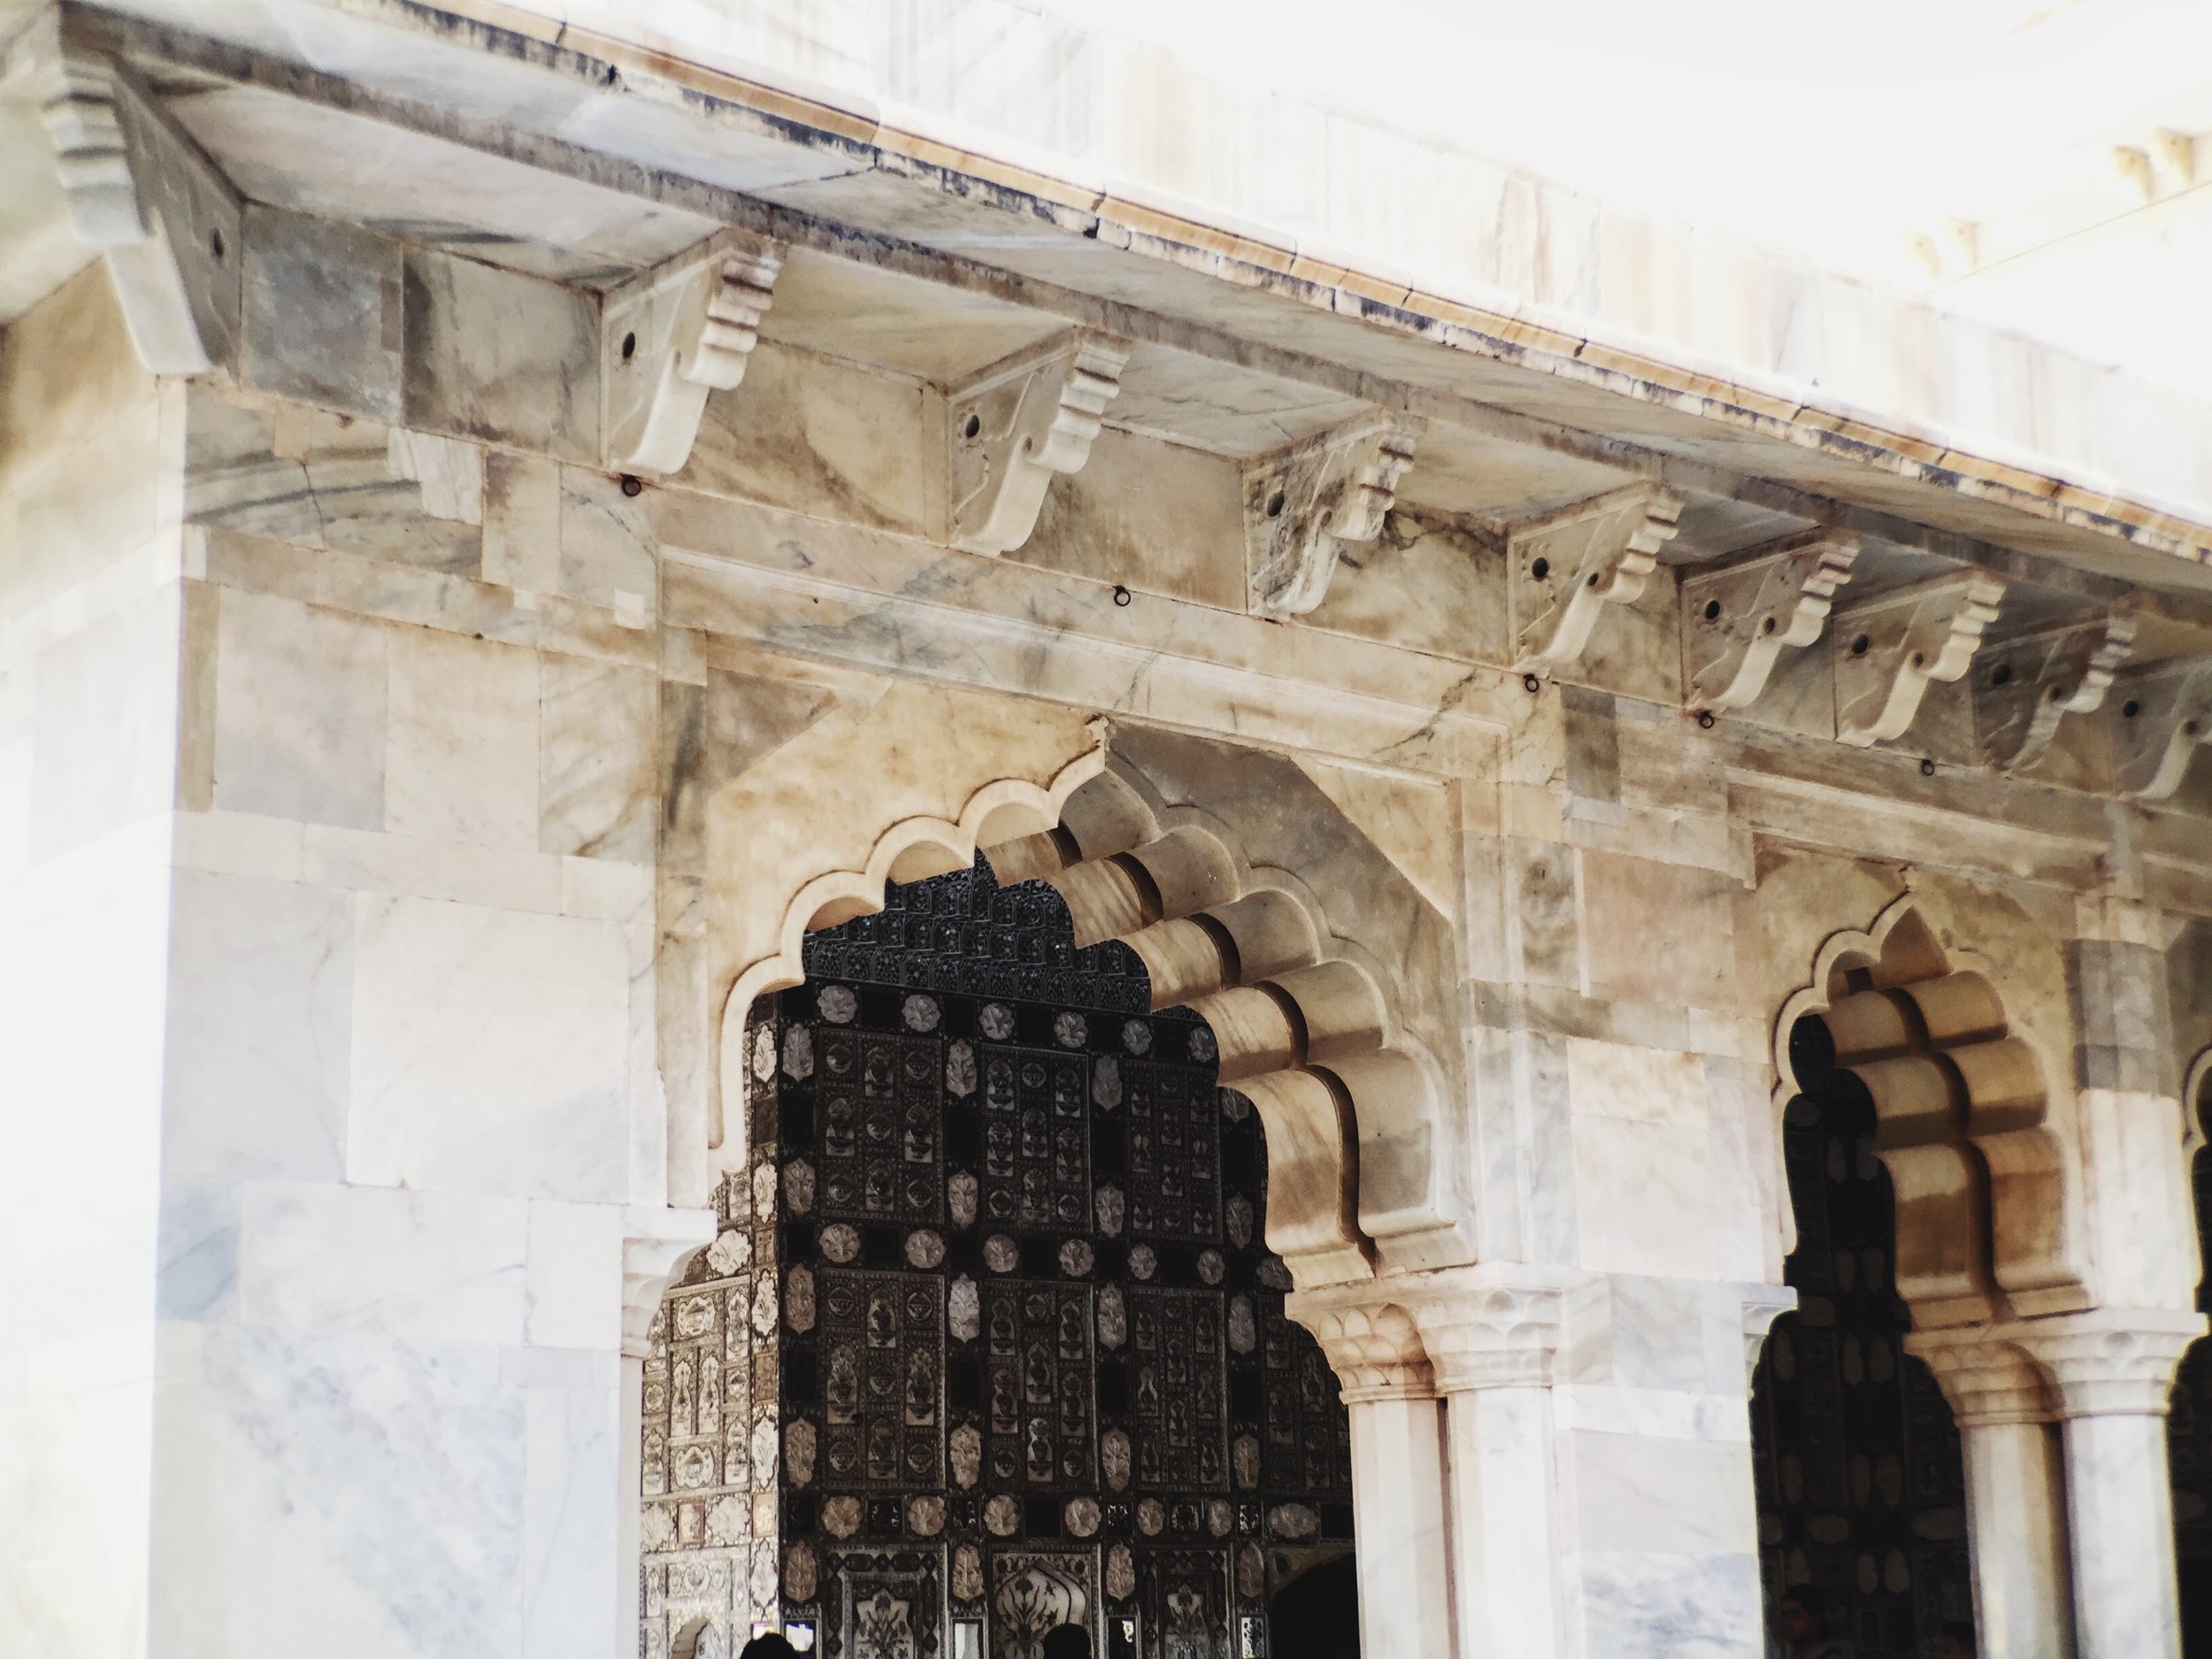 The McHowe World Tour - Part II- Jaipur the Pink City - Amber Fort